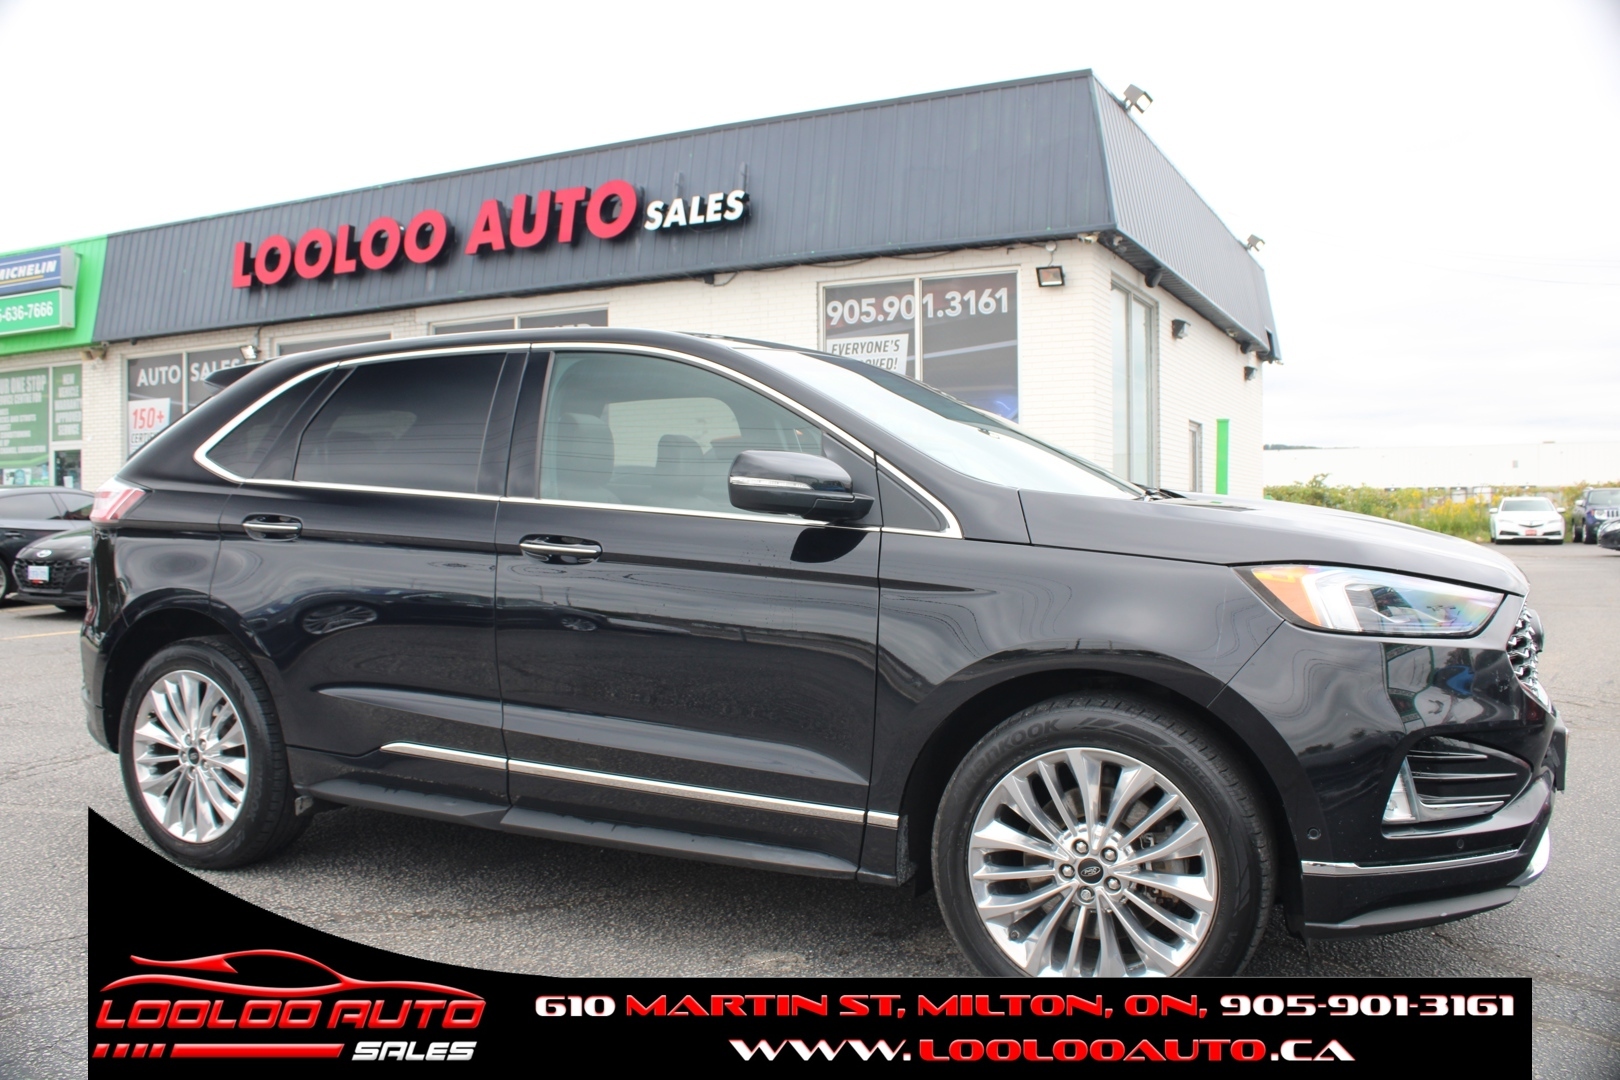 2020 Ford Edge Titanium AWD Navigation No Accident $87 Weekly Cer